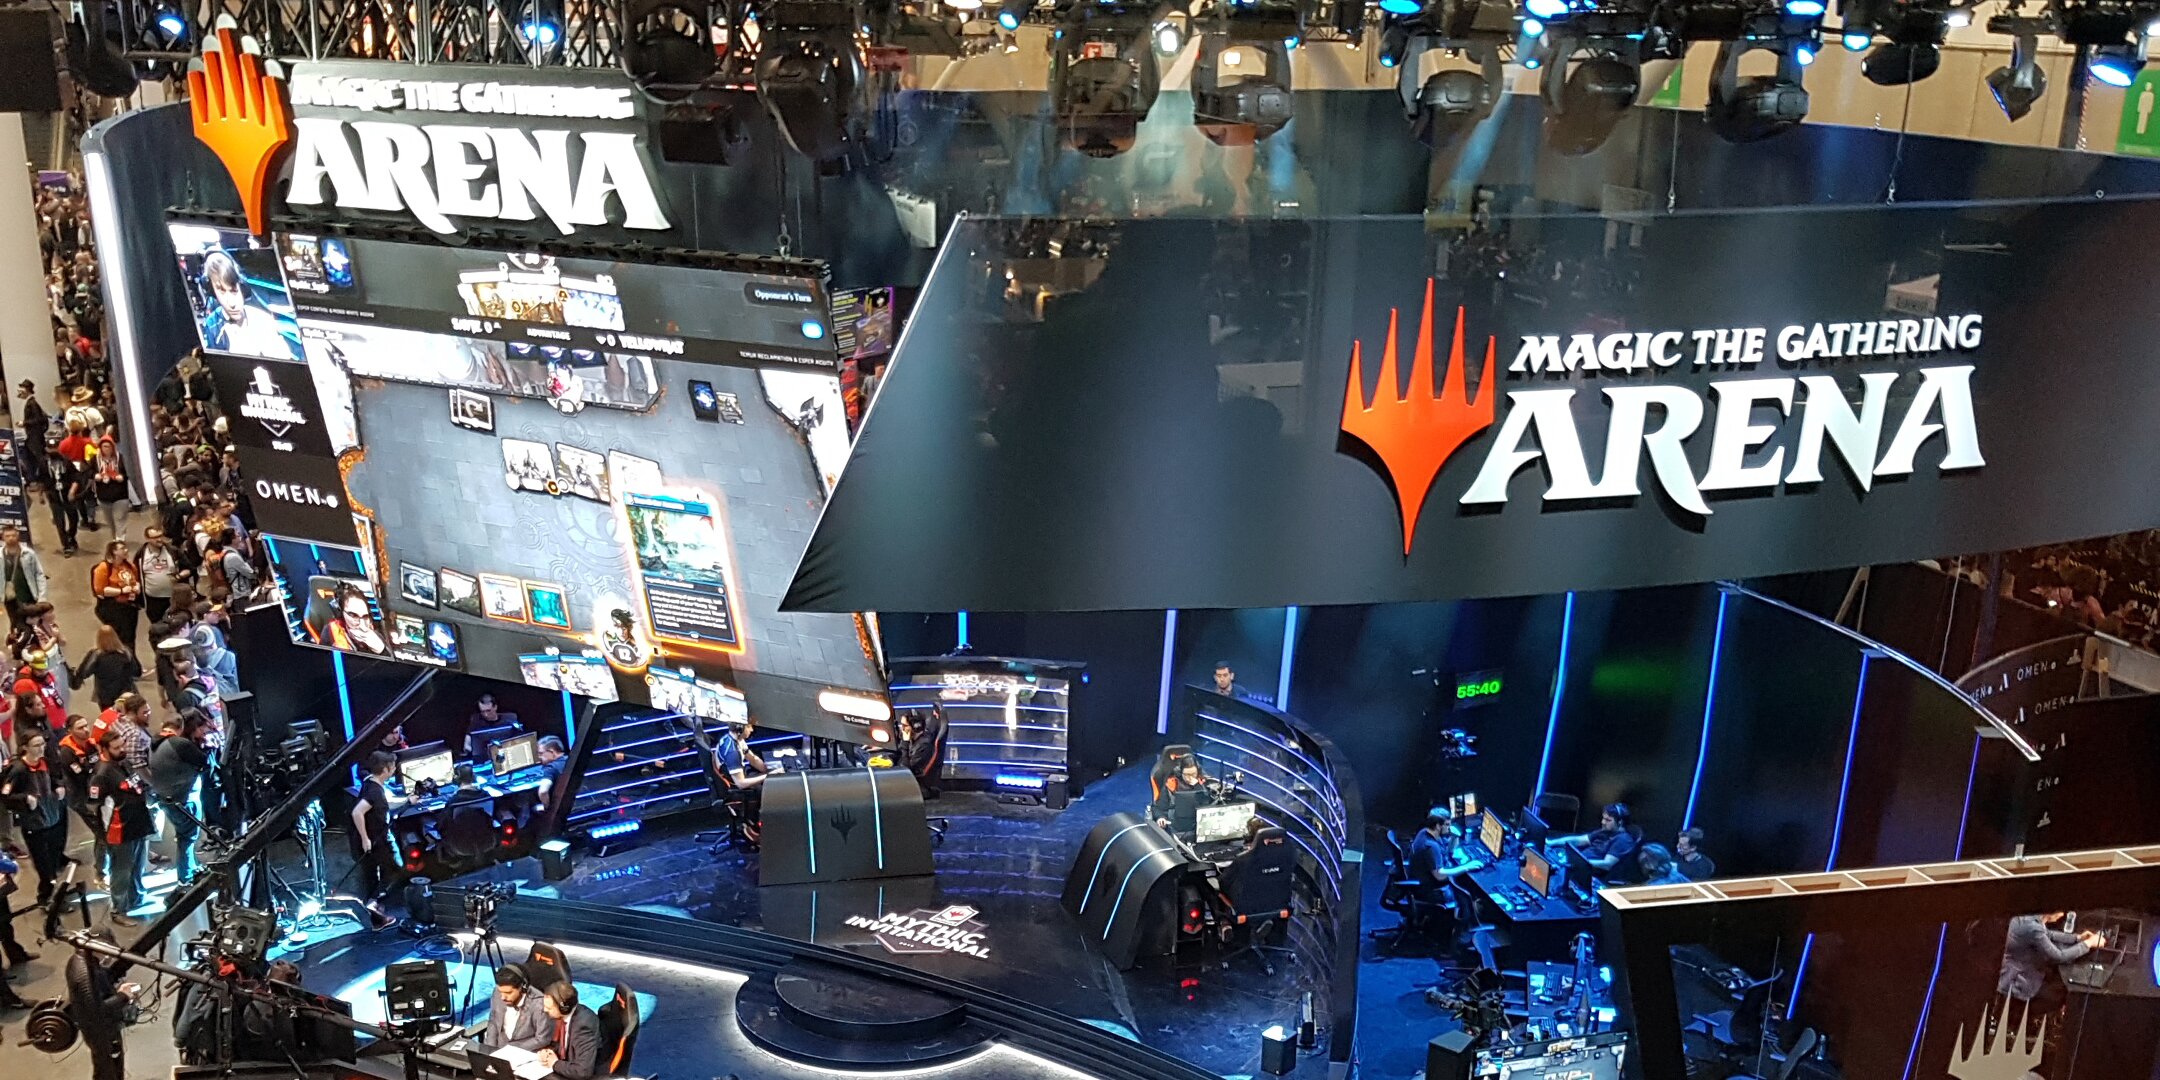 Magic the Gathering: Arena was a focal point on the PAX East 2019 Expo Hall floor.